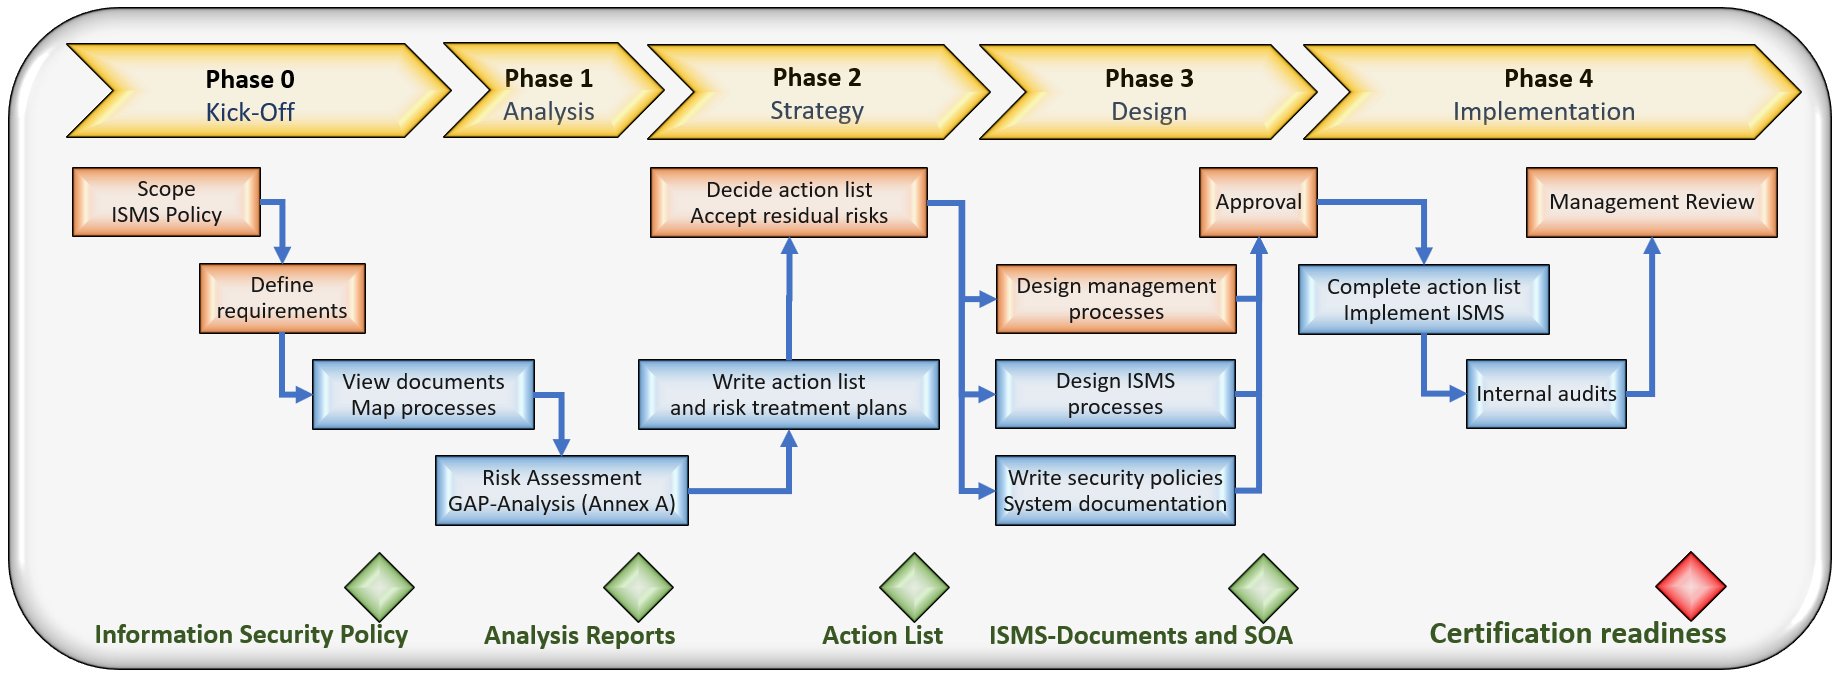 Image: process flow - Implementation of an information security management system (ISMS).